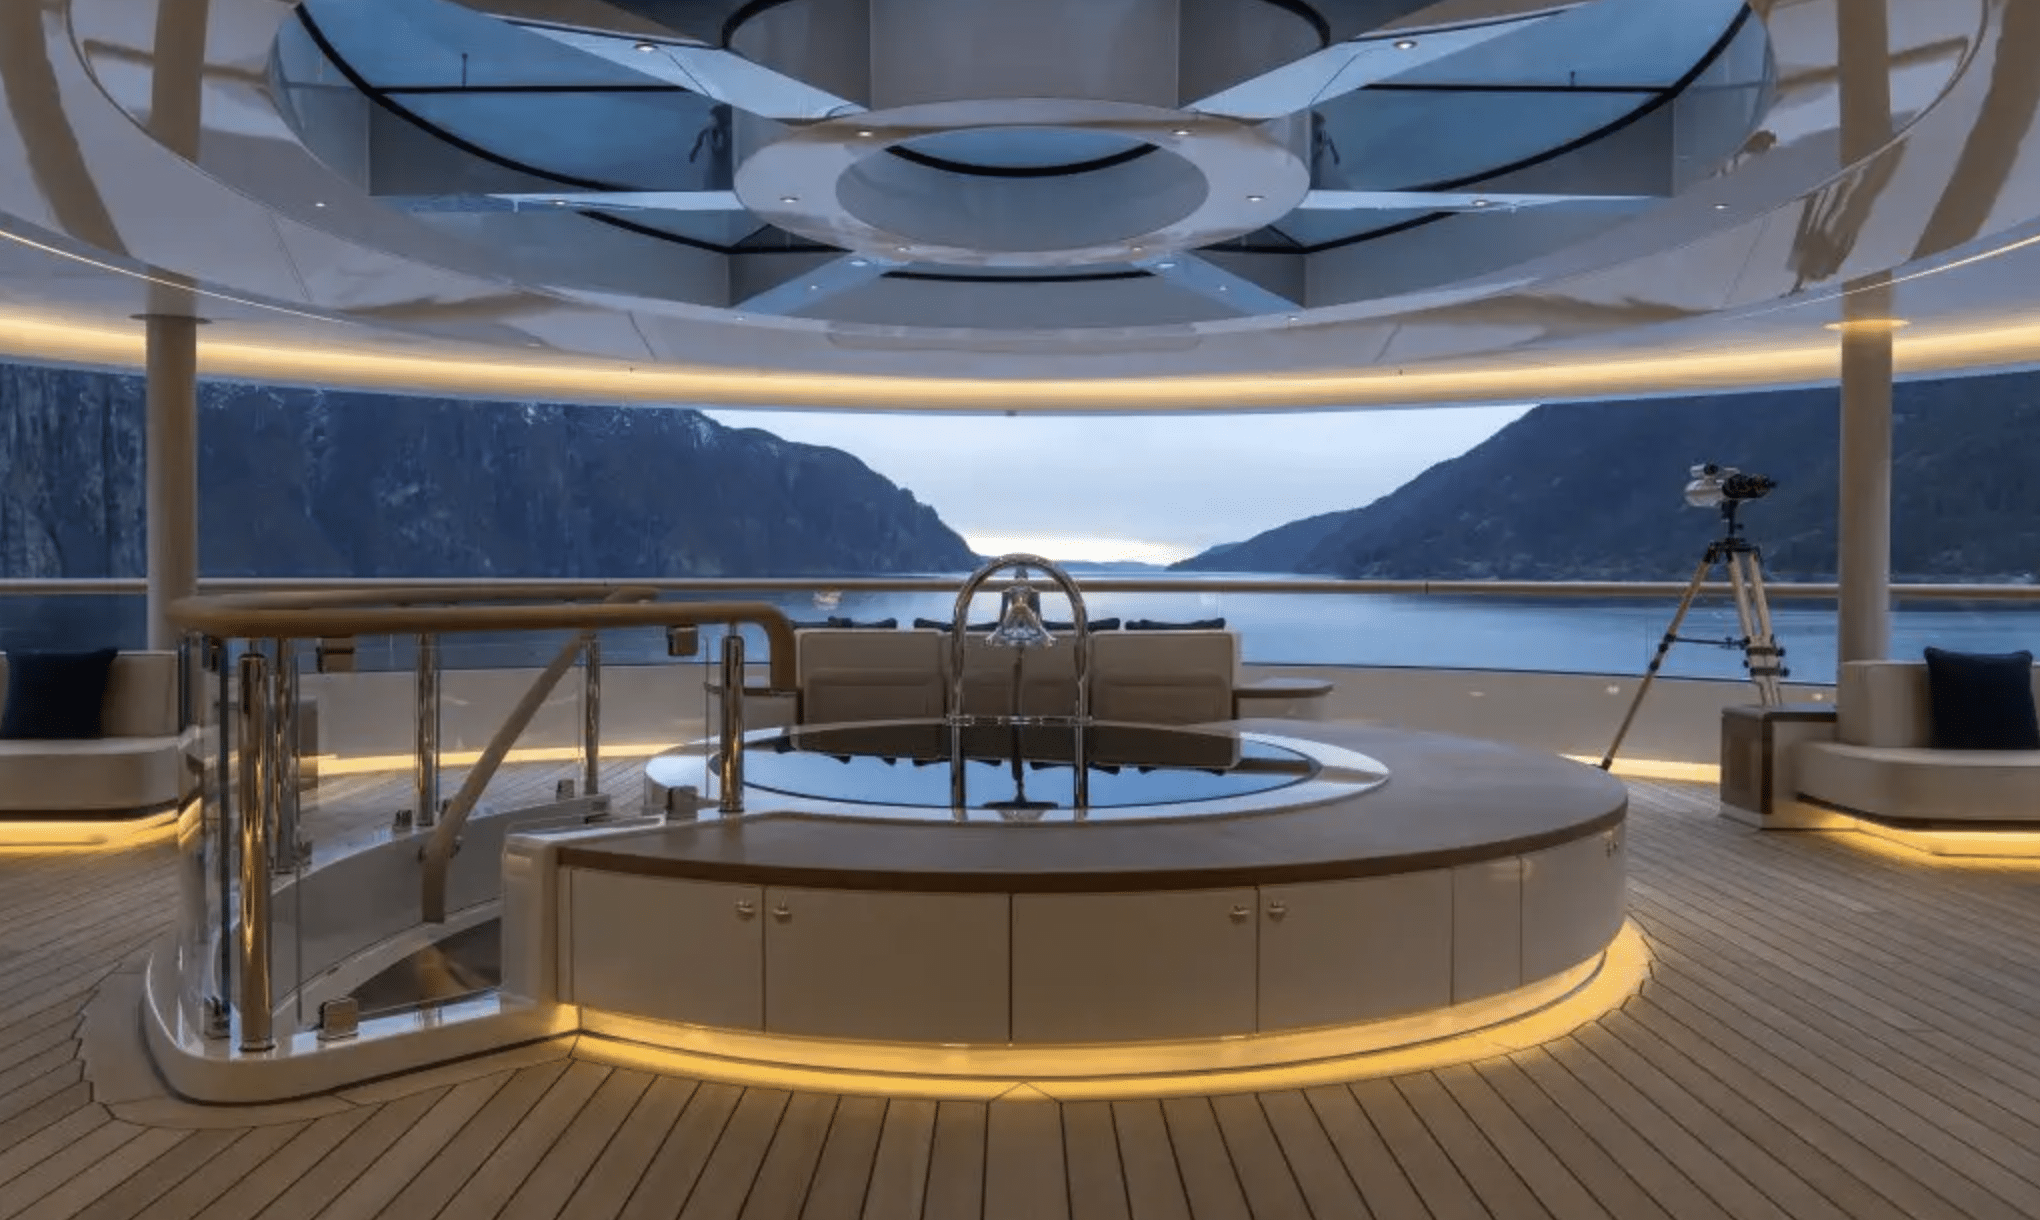 This is the superyacht and Jay-Z vacationing are Beyoncé on